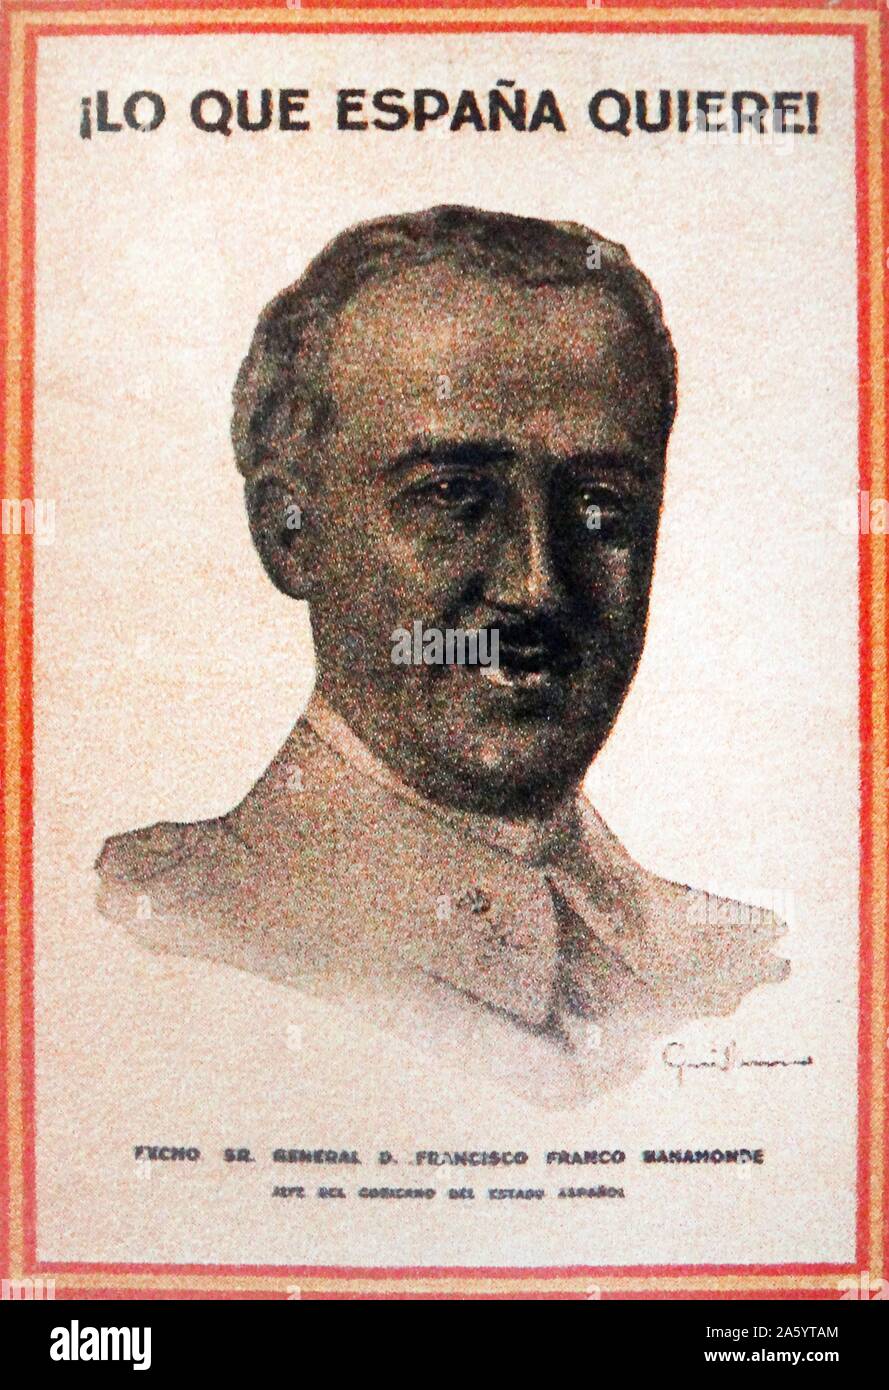 lo que espana quiere! What Spain wants!. A poster depicting General Francisco Franco, the nationalist leader during the Spanish Civil War Stock Photo